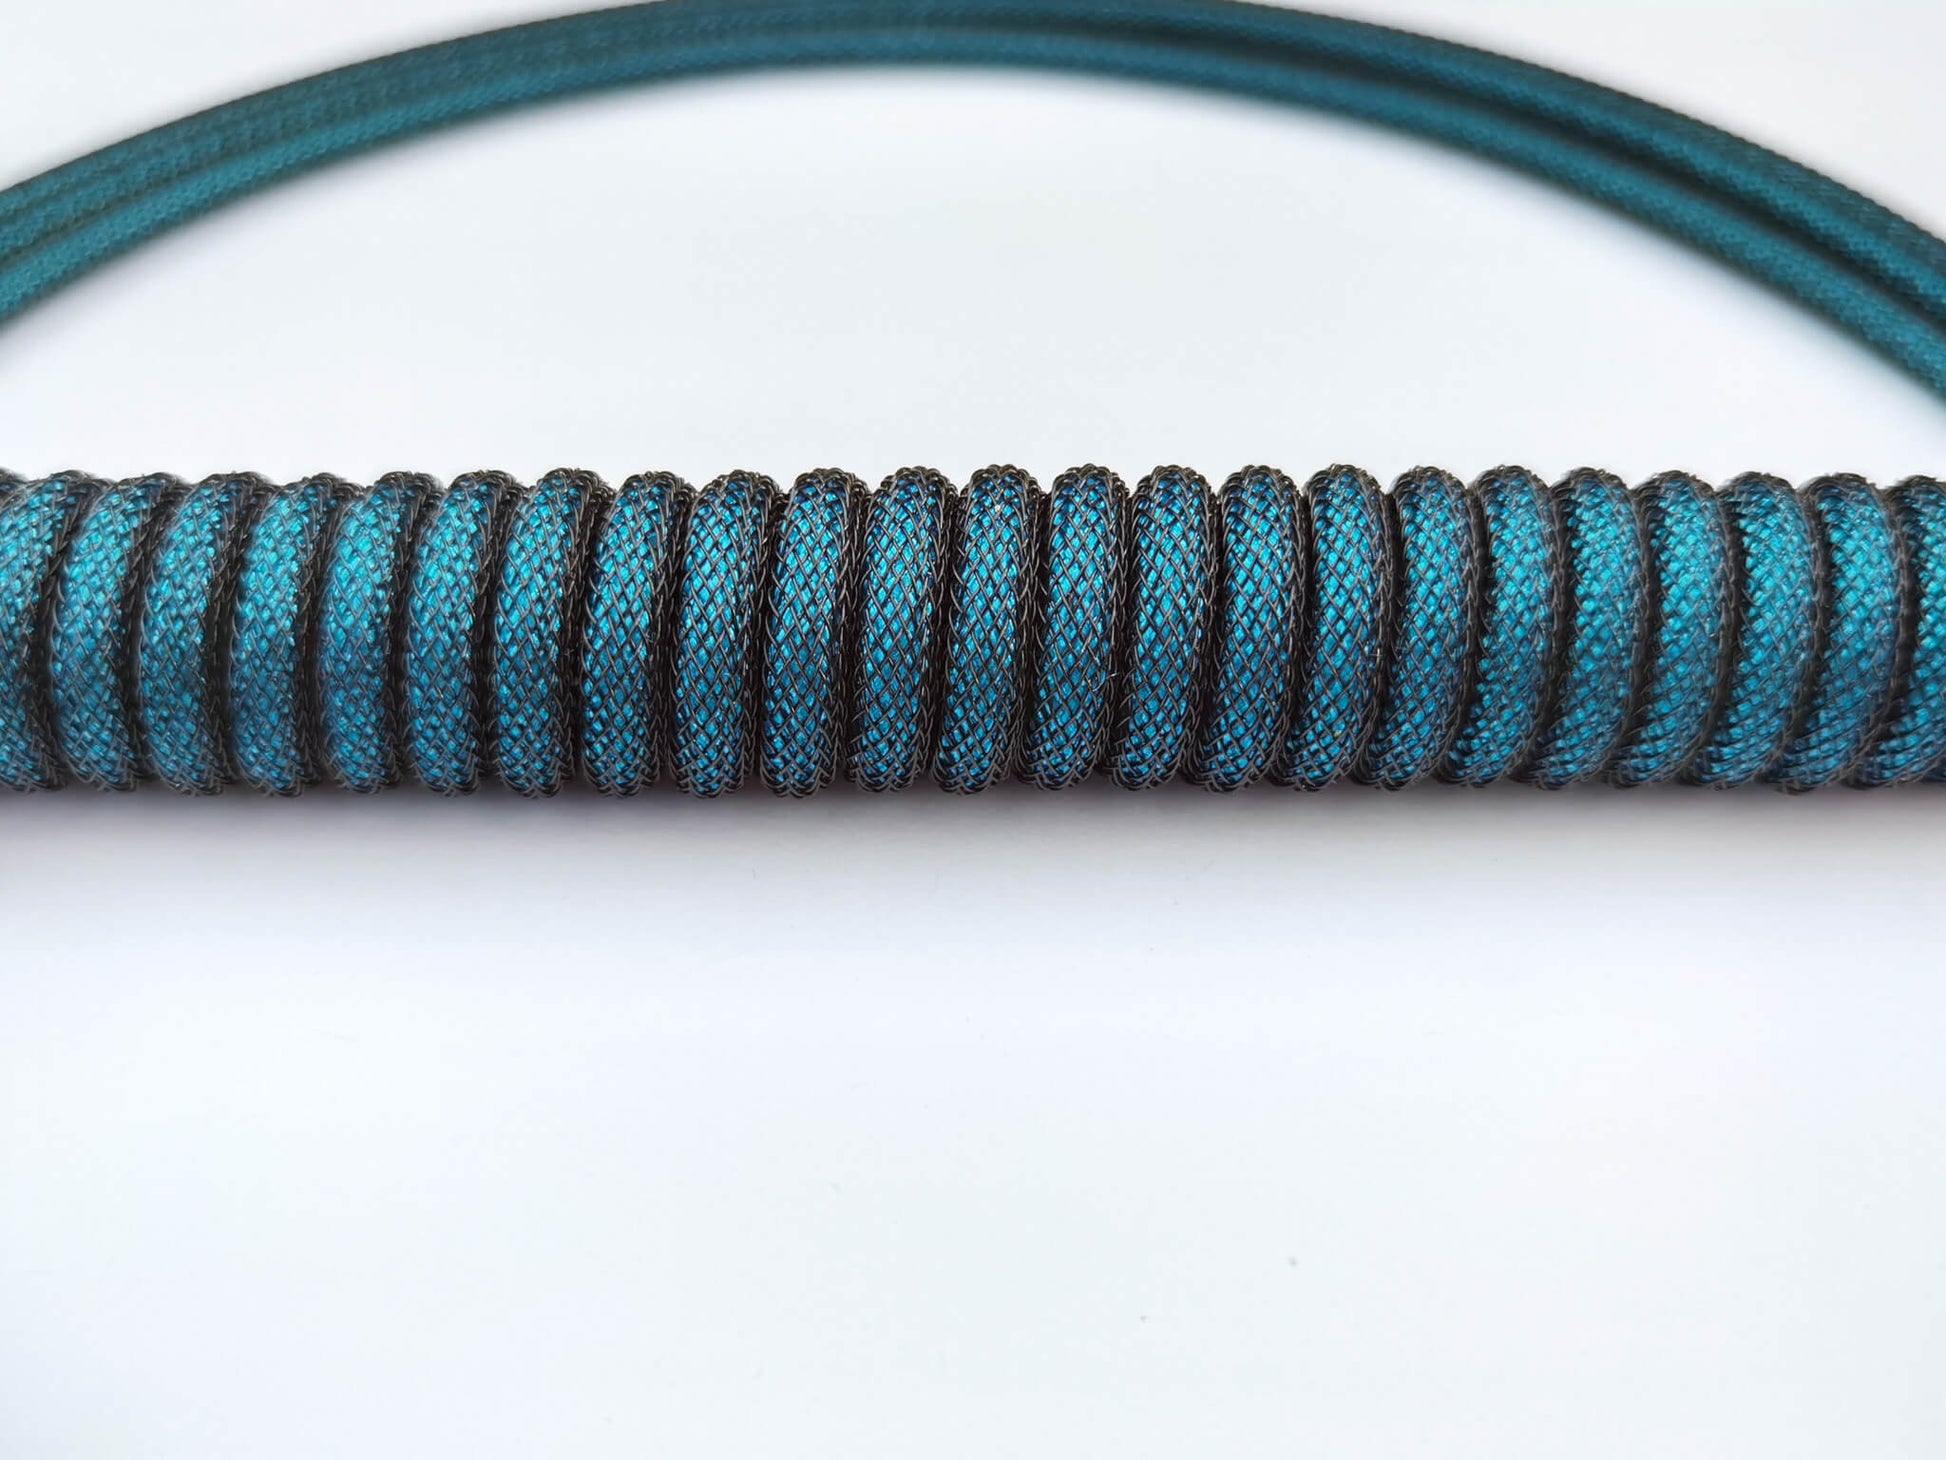 Dark blue coiled cable